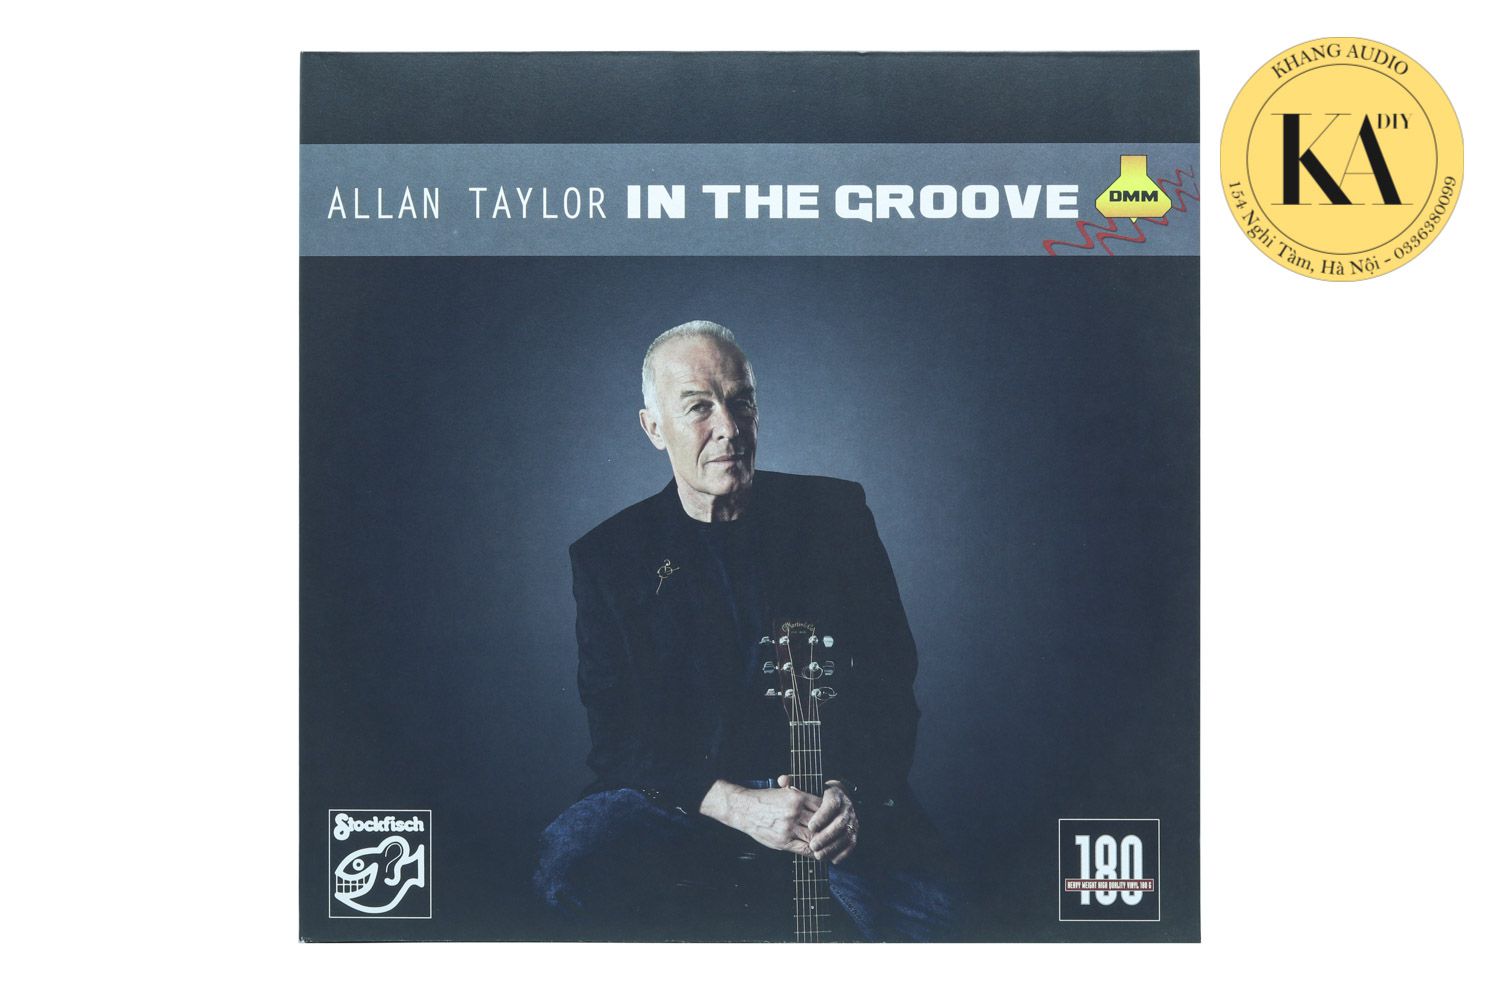 LP In The Groove - Allan Taylor; Khang Audio 0336380099